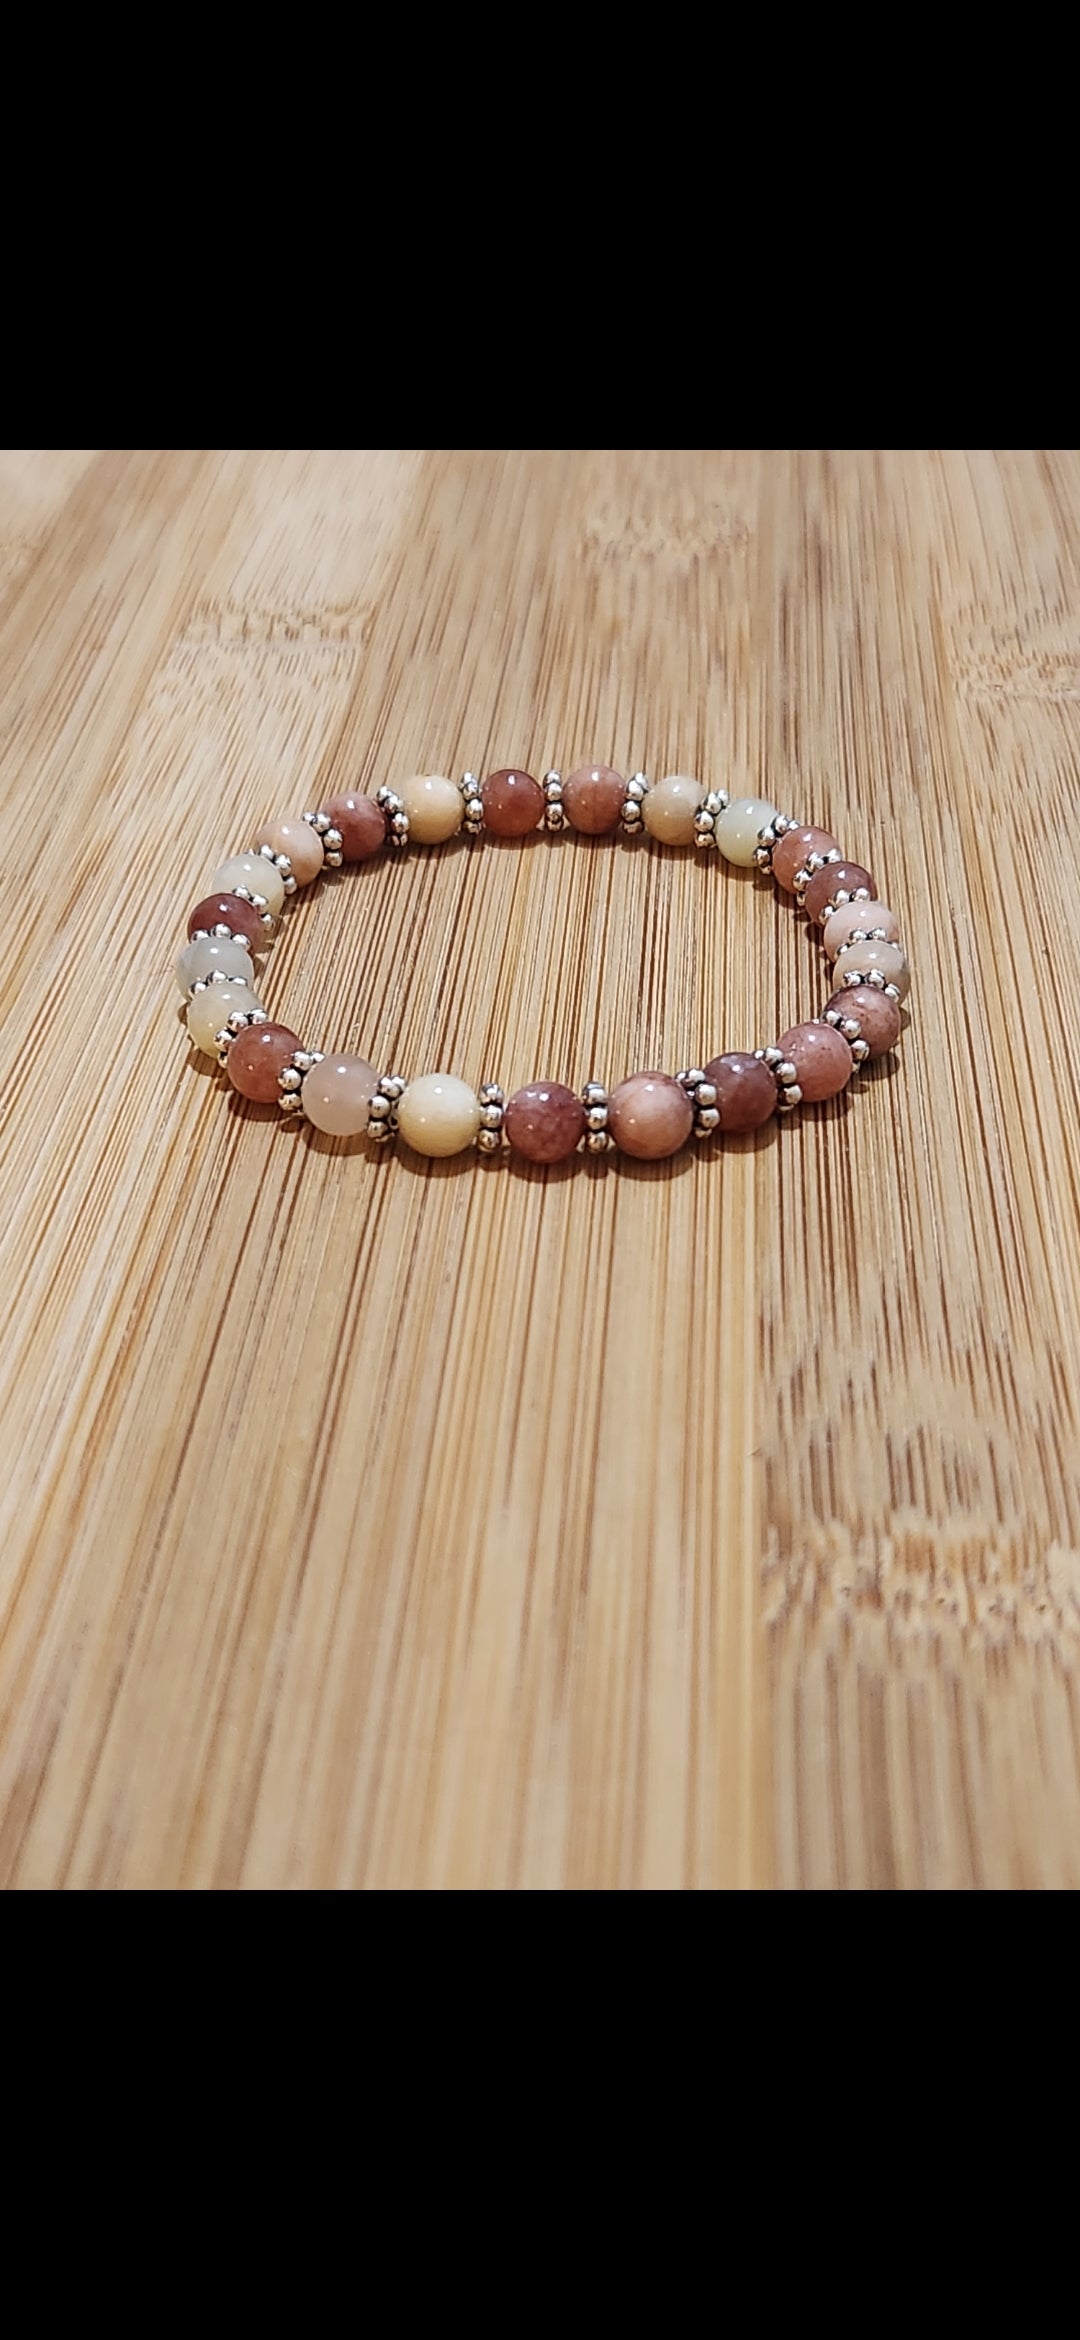 Sunstone Bracelet with accents - optimism - supportive - confidence - self worth - stress